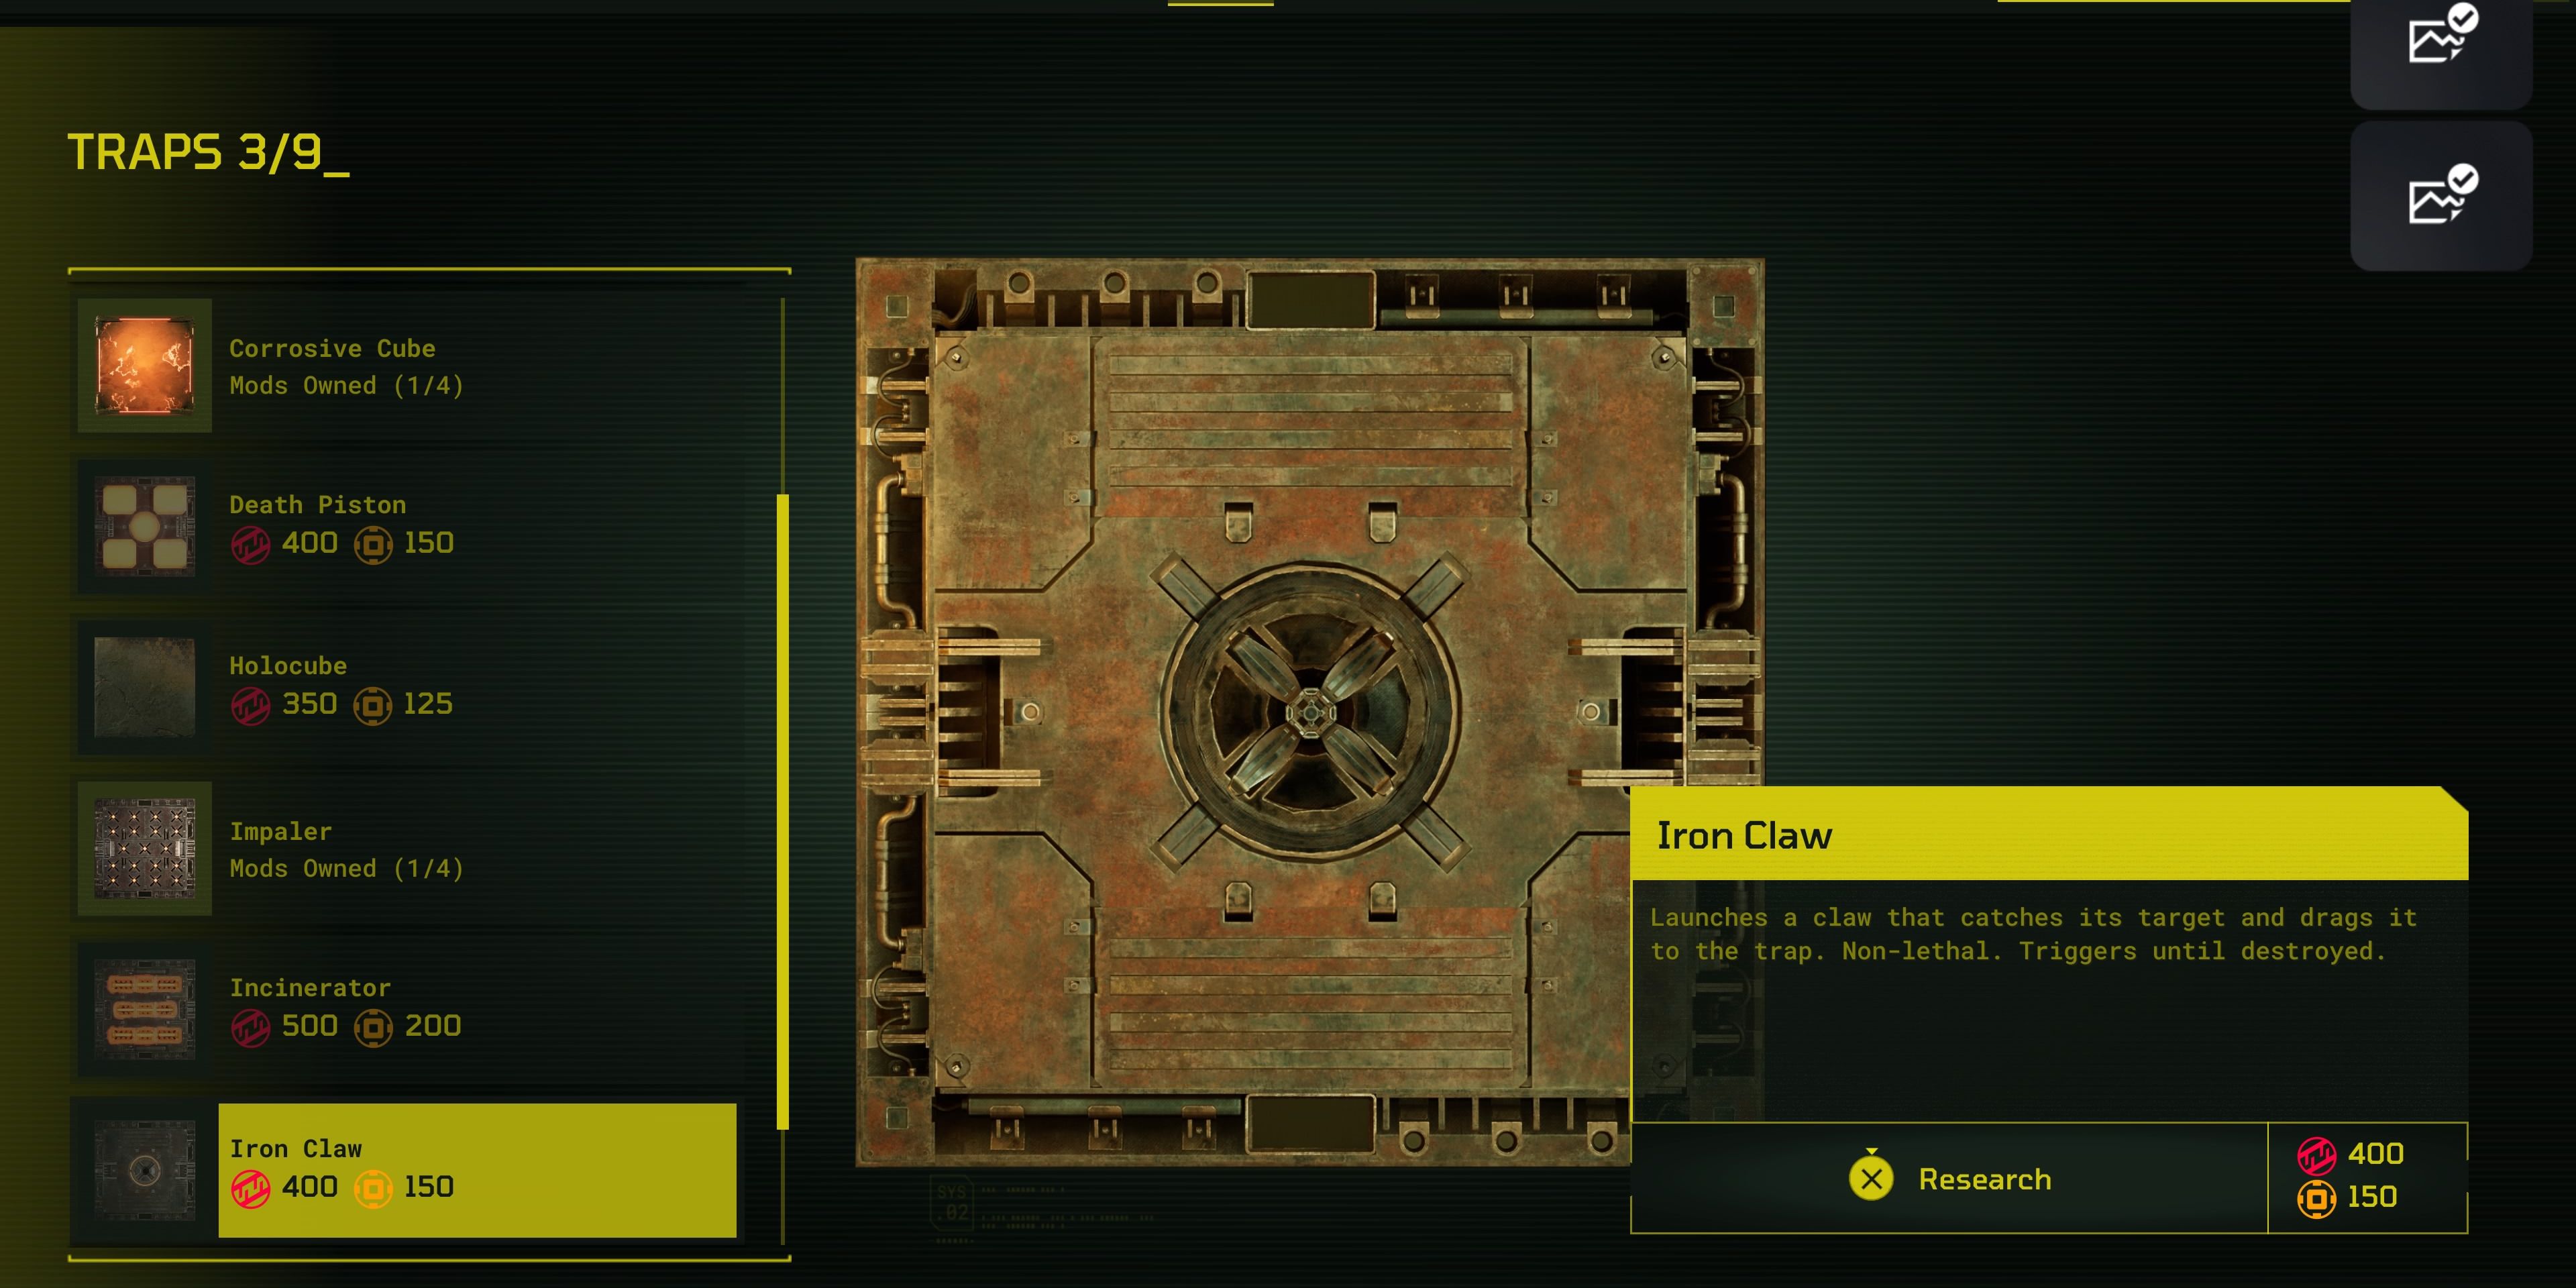 Image shows the Iron Claw trap in Meet Your Maker